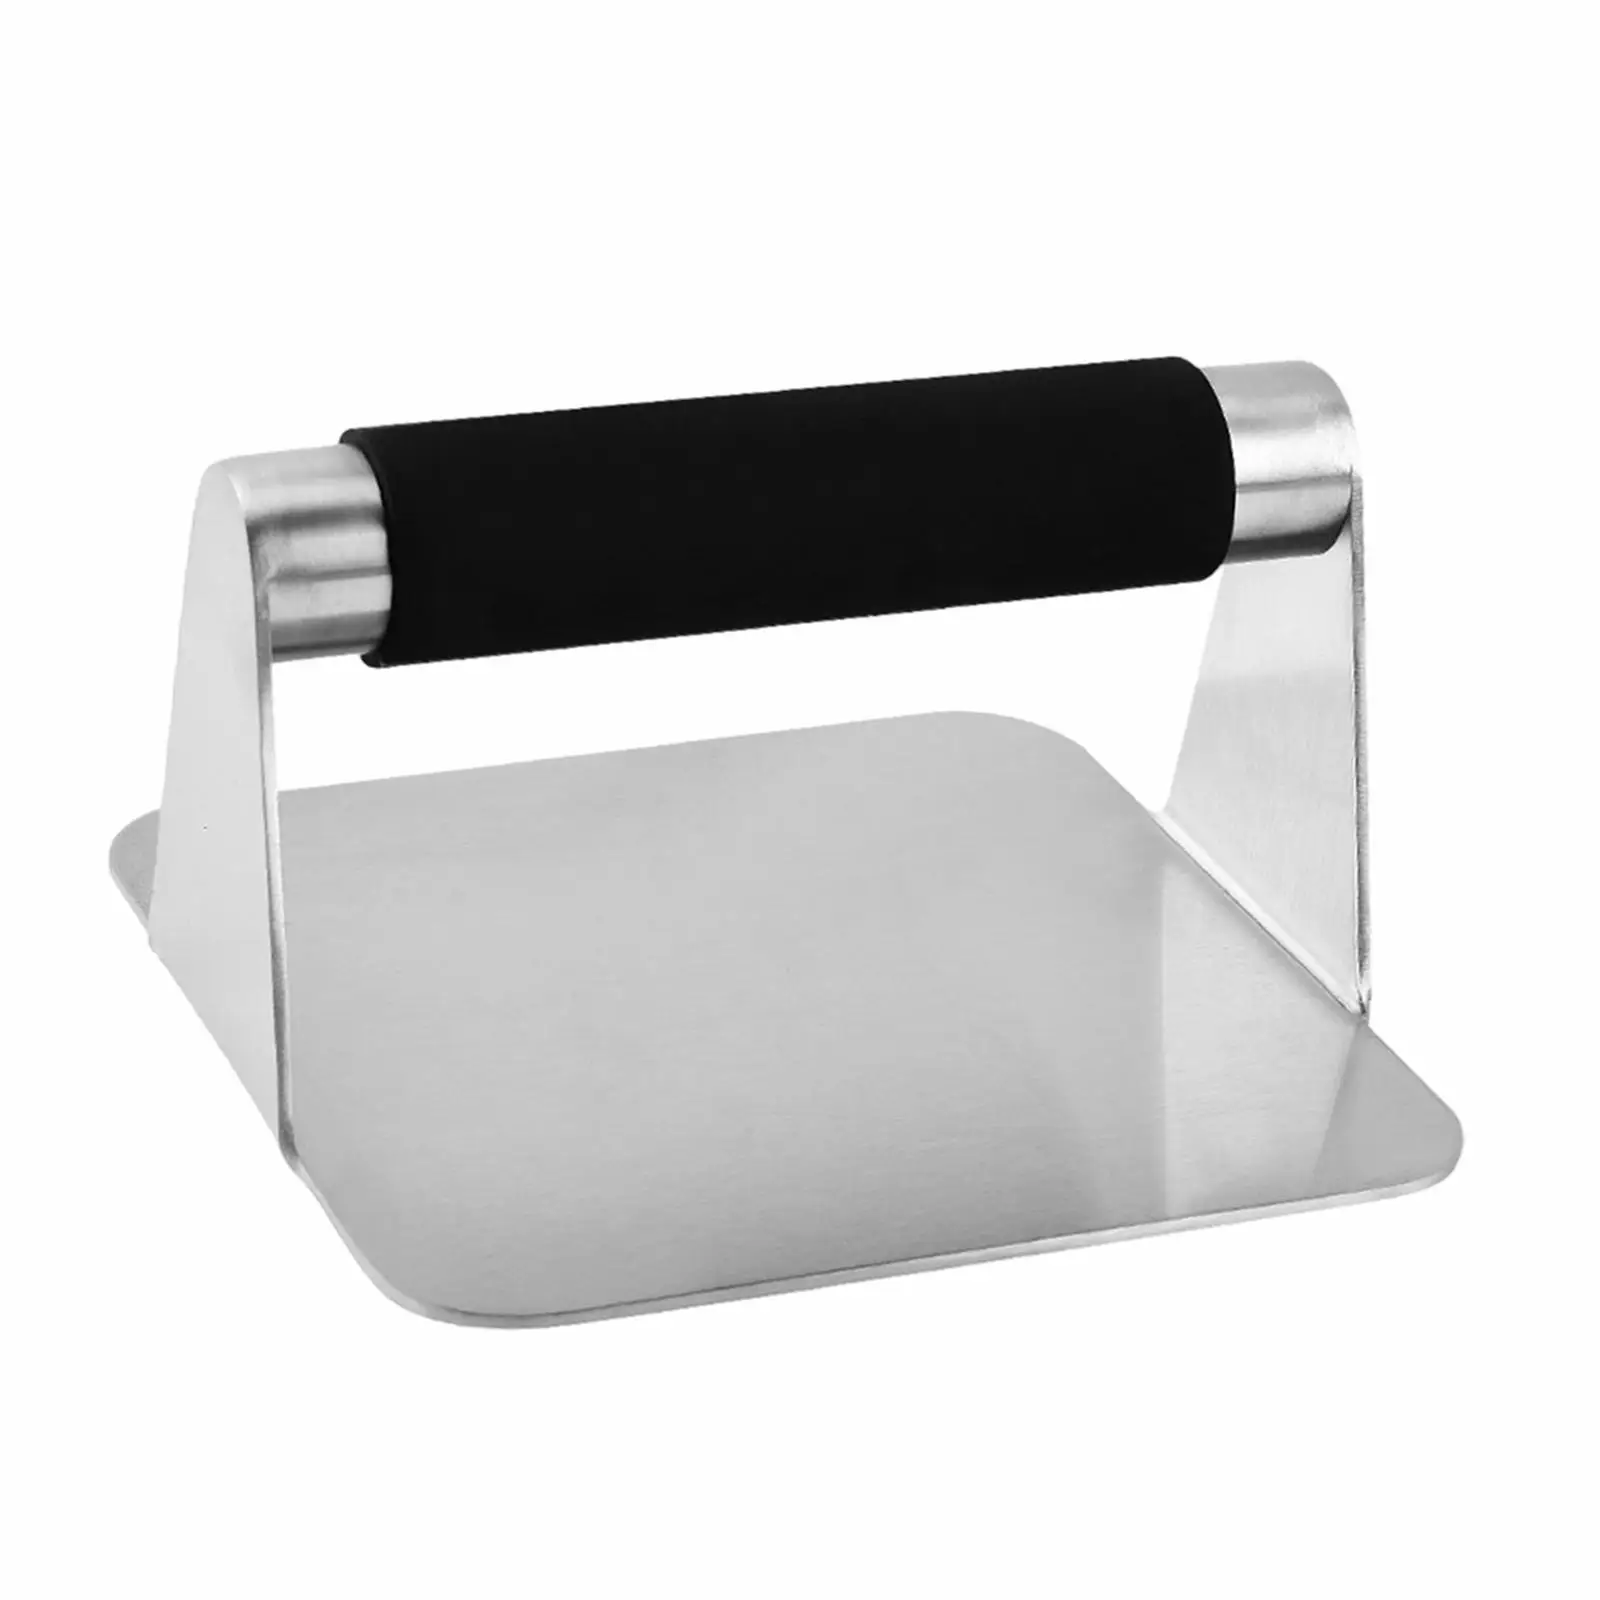 Burger Presses Stainless Steel Manual Smooth Kitchen Accessories Burger Smasher Meat Beef Burger for Cooking Grill BBQ Meat